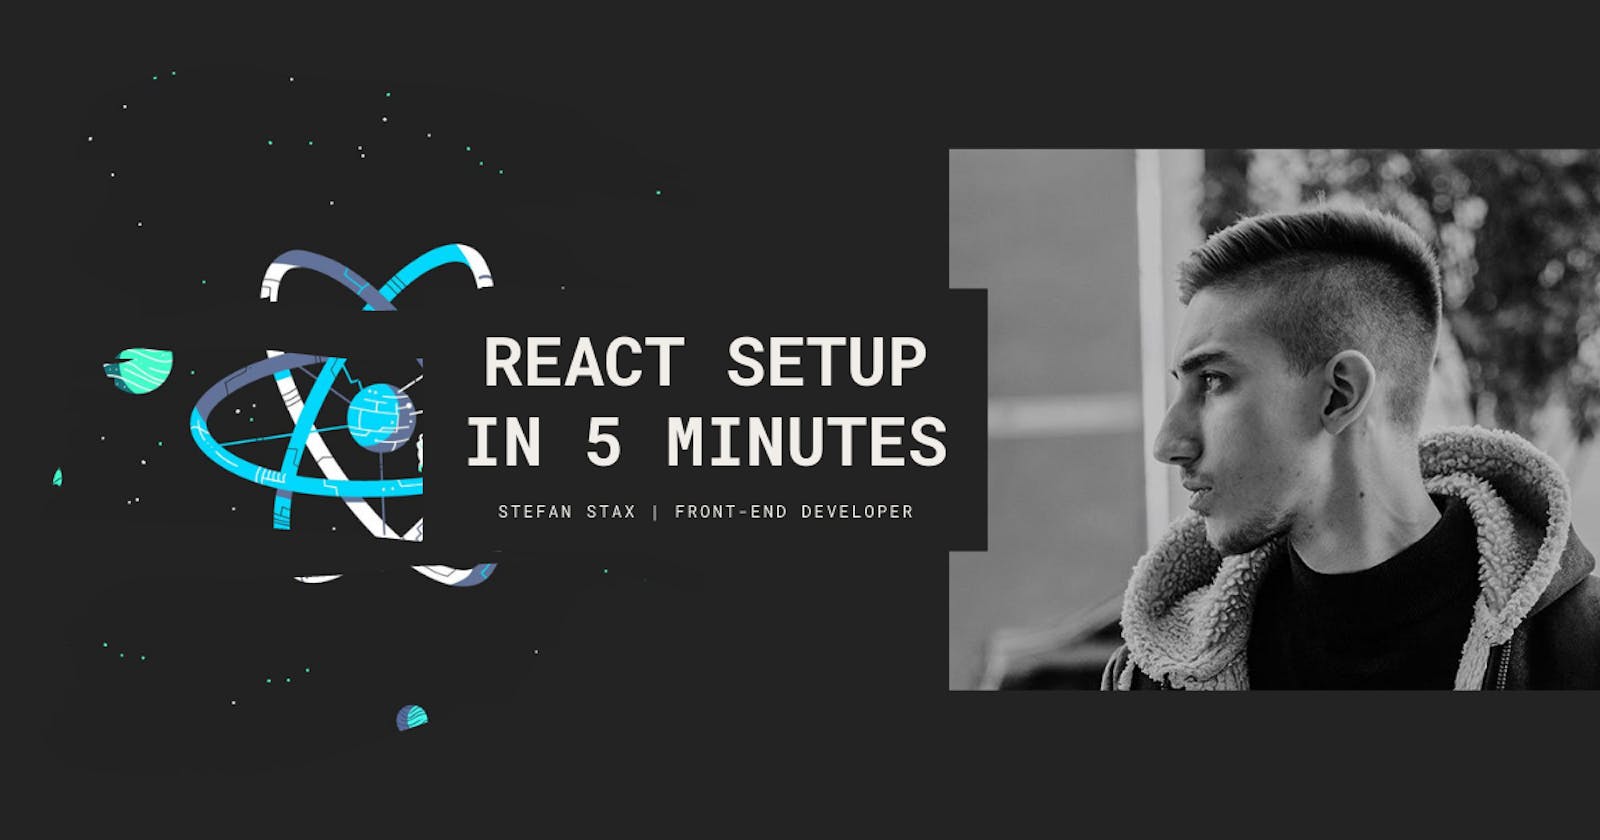 React setup in 5 minutes.